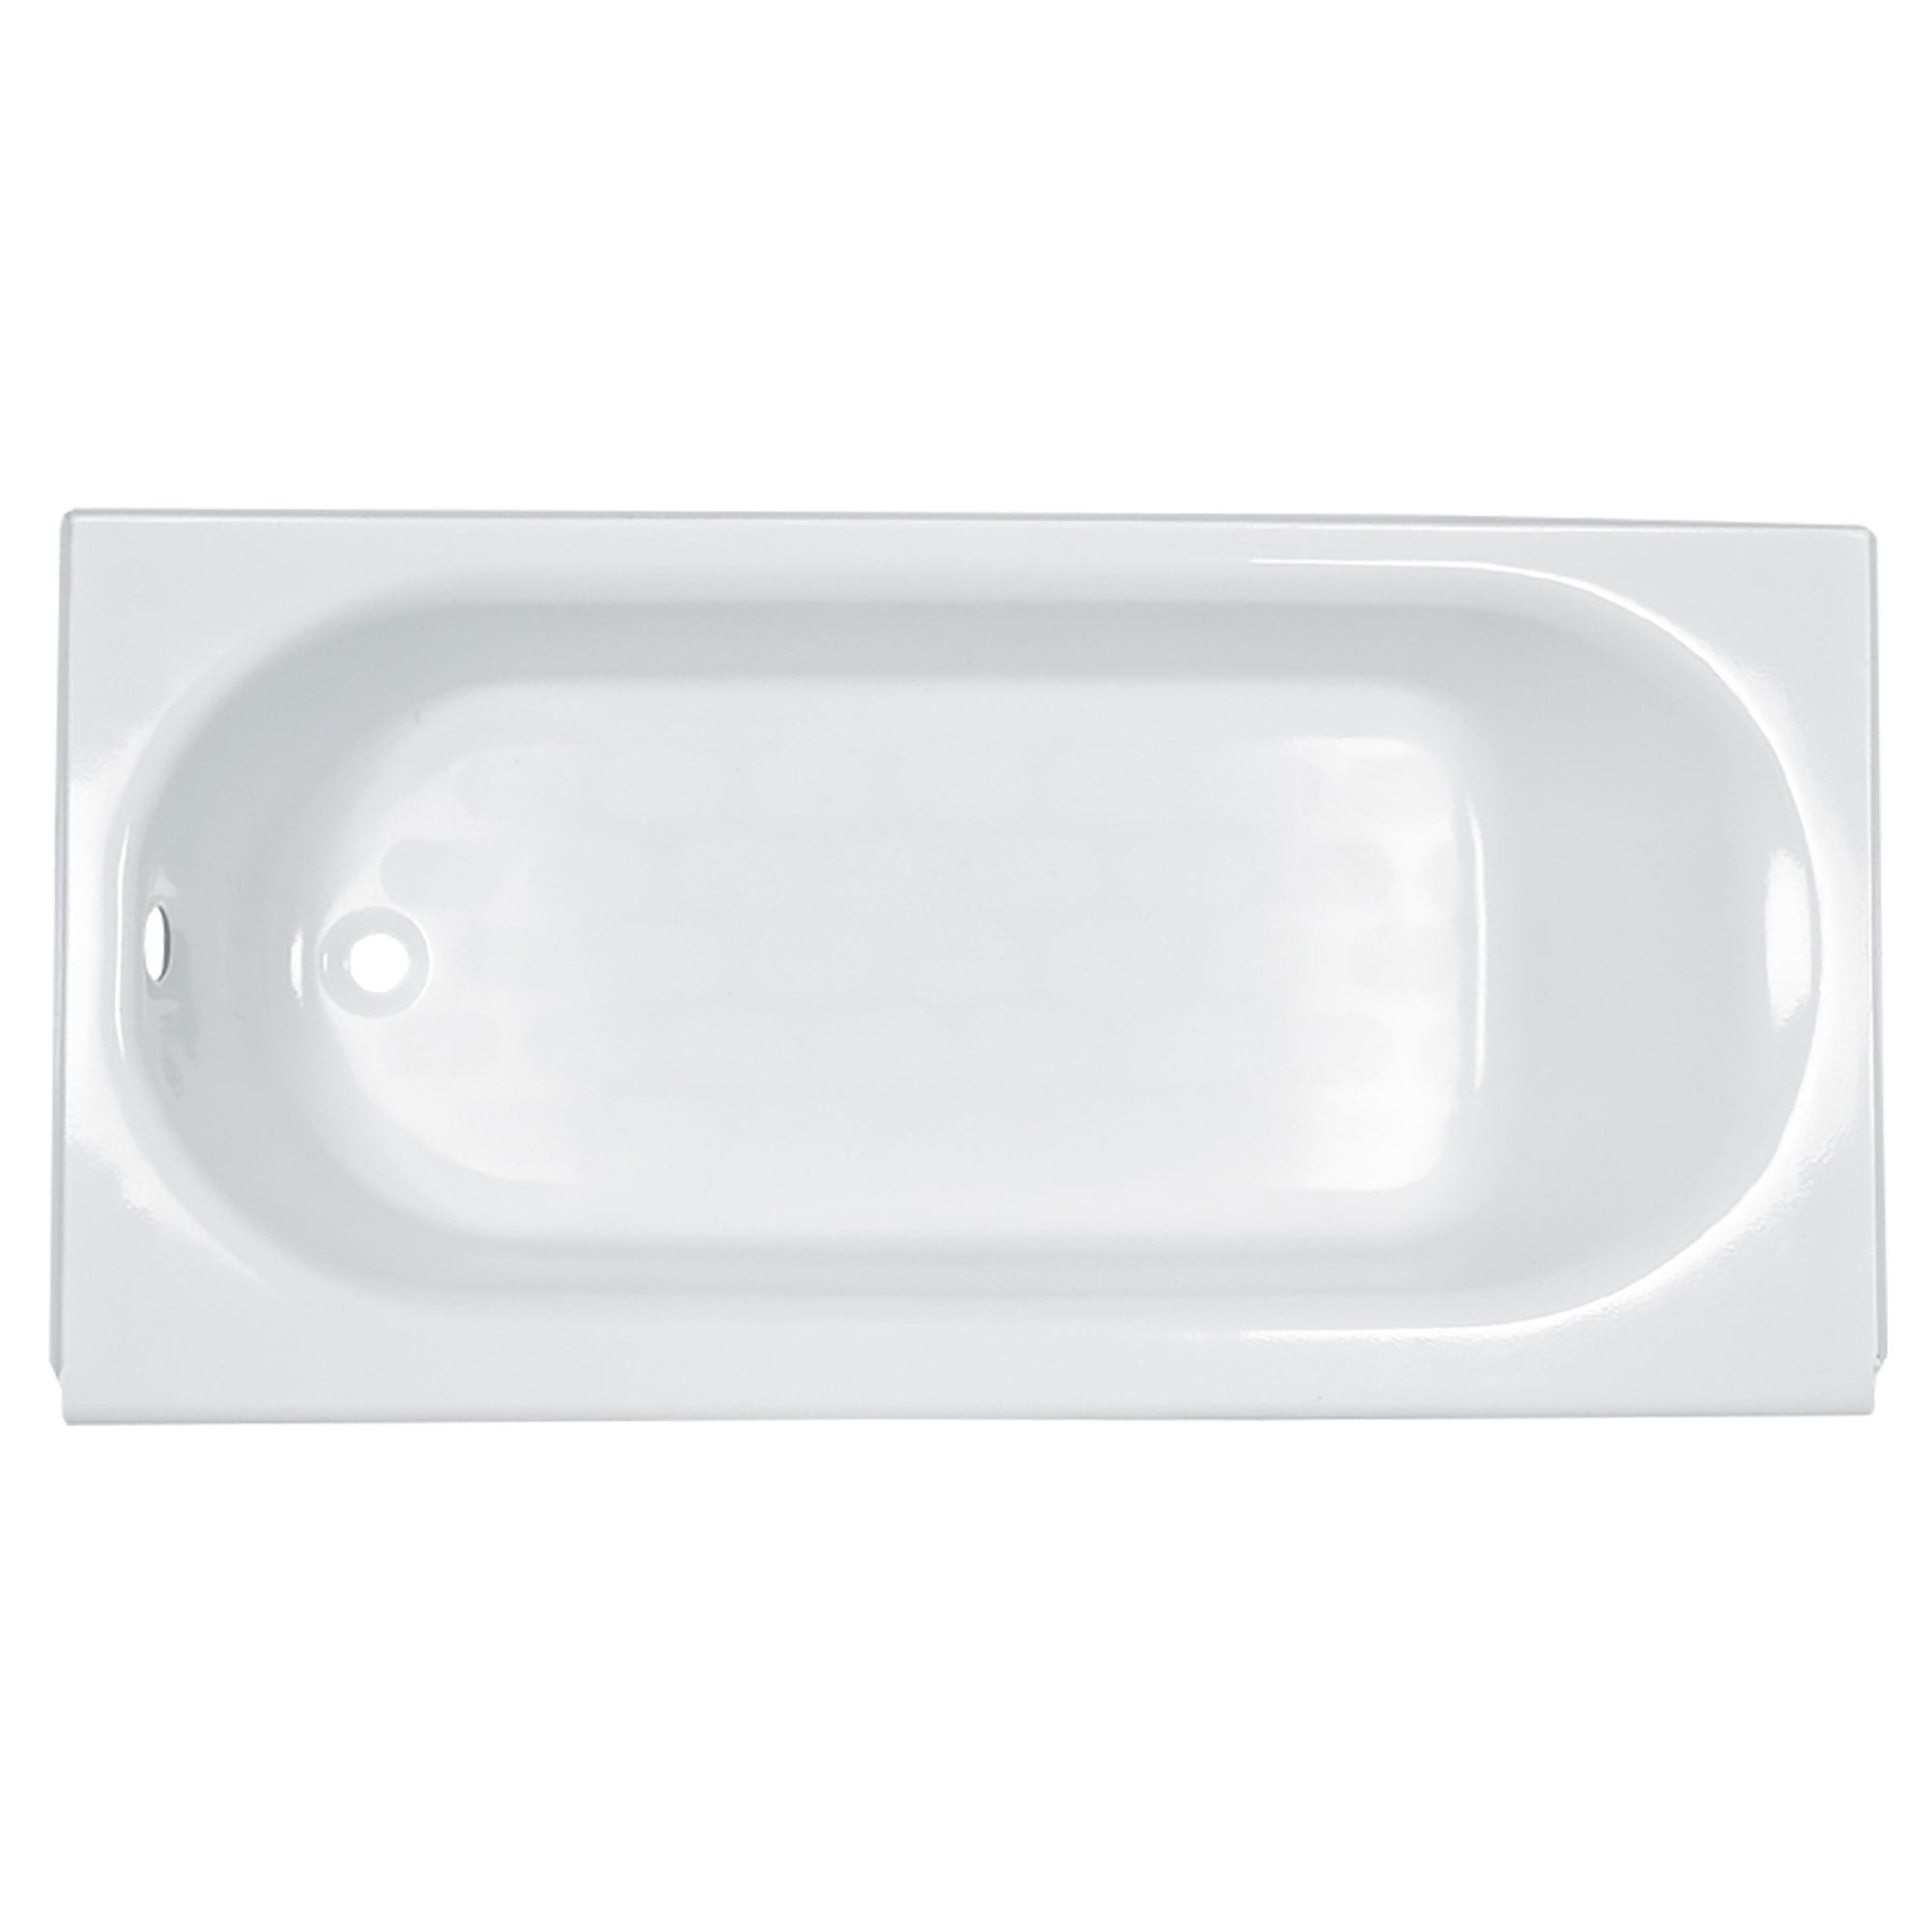 Princeton Americast 60 x 34 Inch Integral Apron Bathtub Left Hand Outlet With Luxury Ledge WHITE